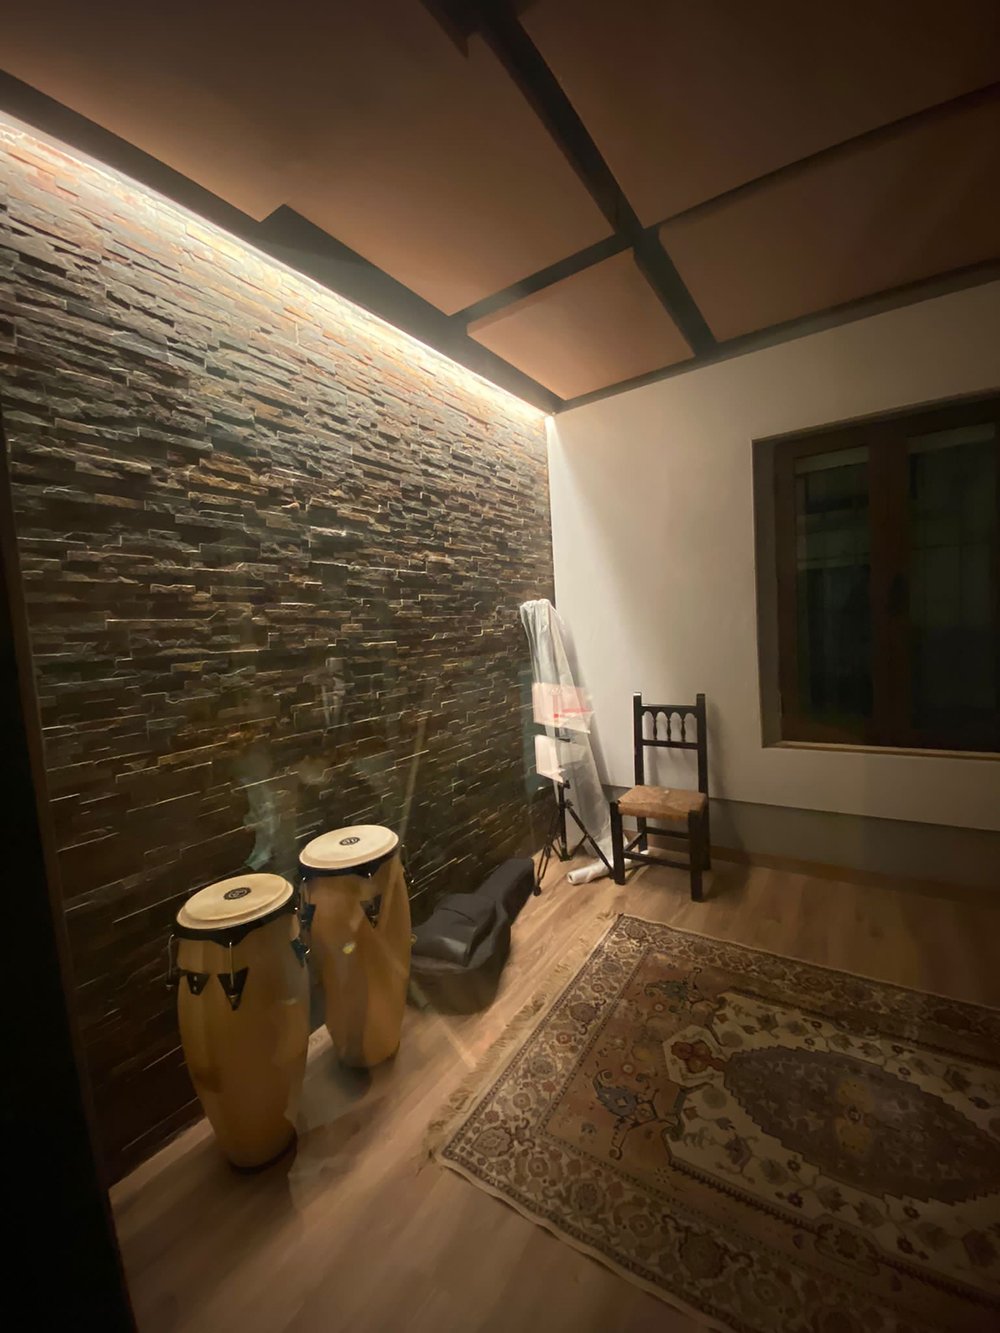 Image of recording studio interior with drums